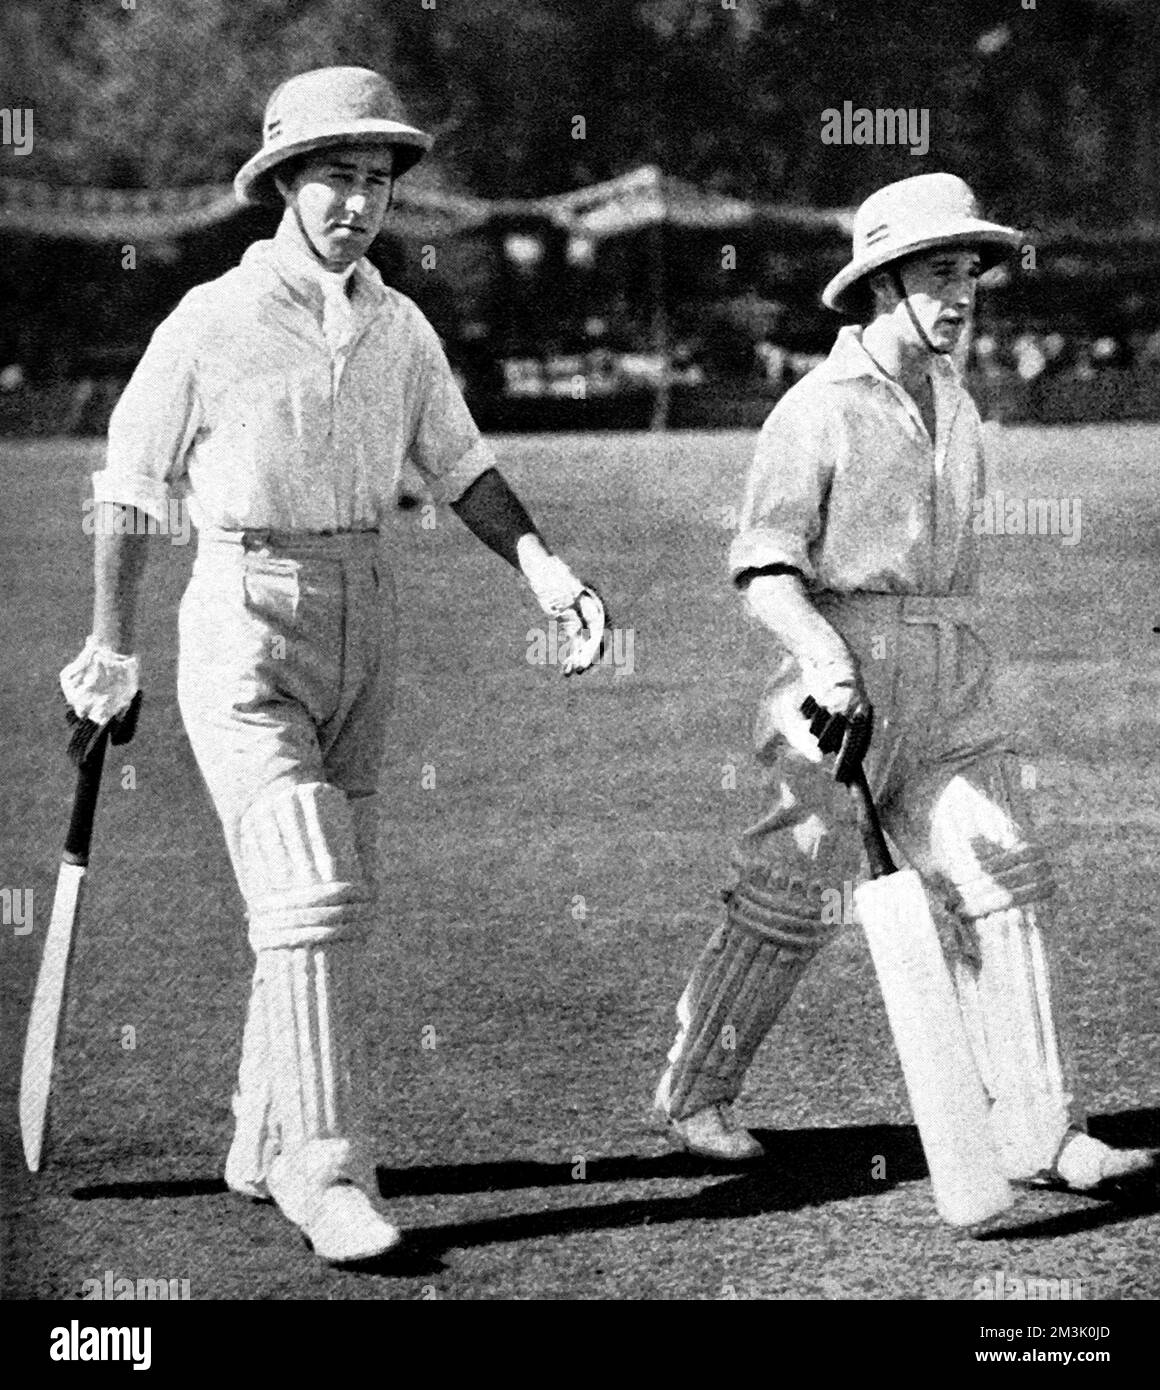 Photograph of W. Edrich and N.W.D. Yardley walking out to open the innings for the Lord Tennyson XI, in the match against an All-India XI, held at Lahore, 1937.  As can be seen, pith helmets were the order of the day during this unofficial 'Test' series.     Date: 1937 Stock Photo